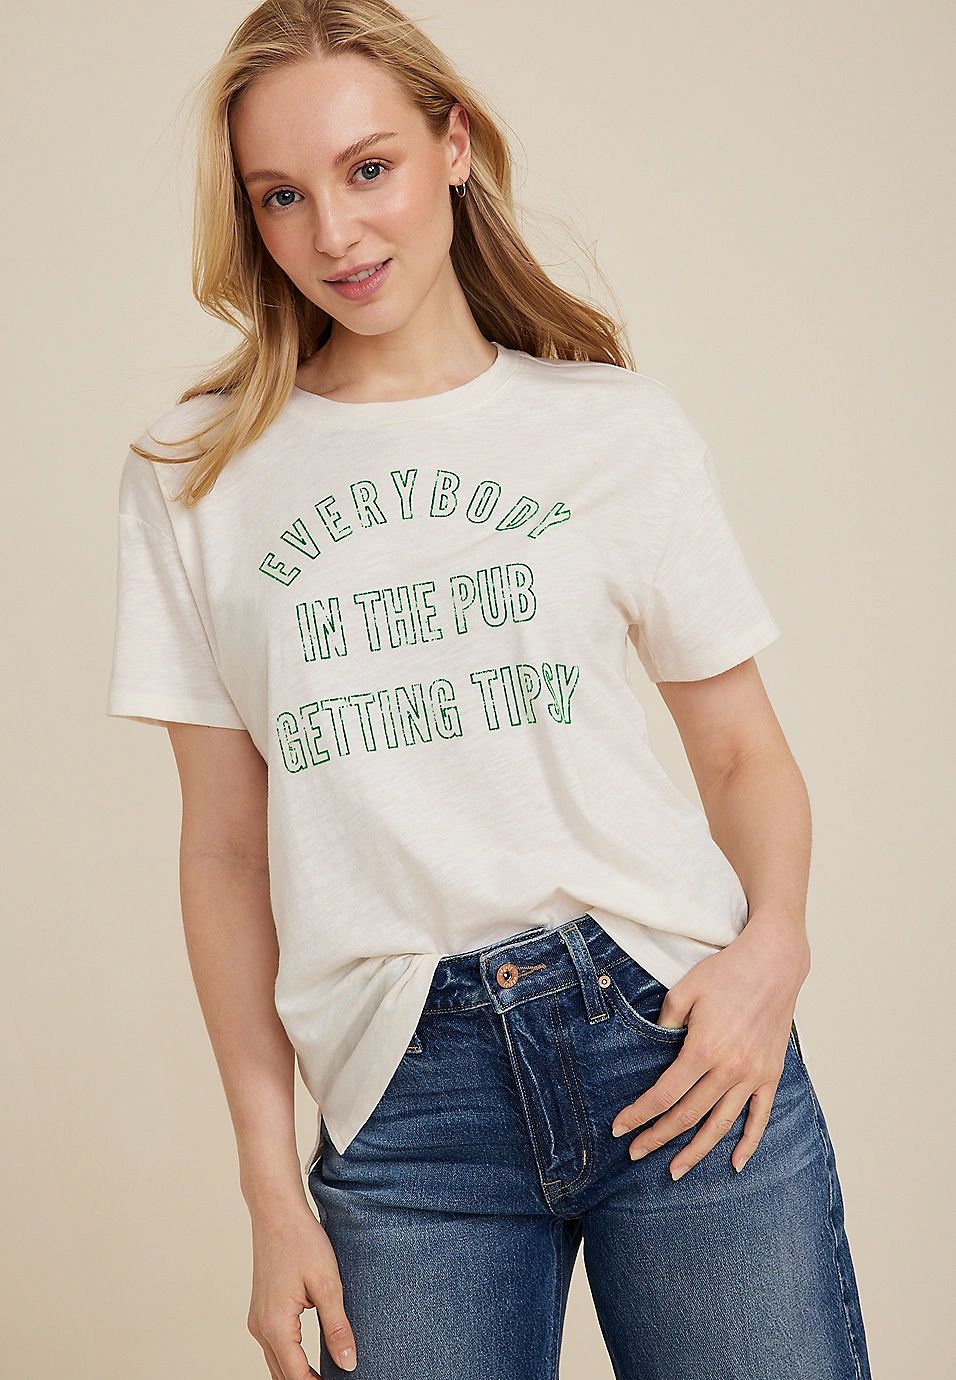 Everybody In The Pub Getting Tipsy Graphic Tee | Maurices